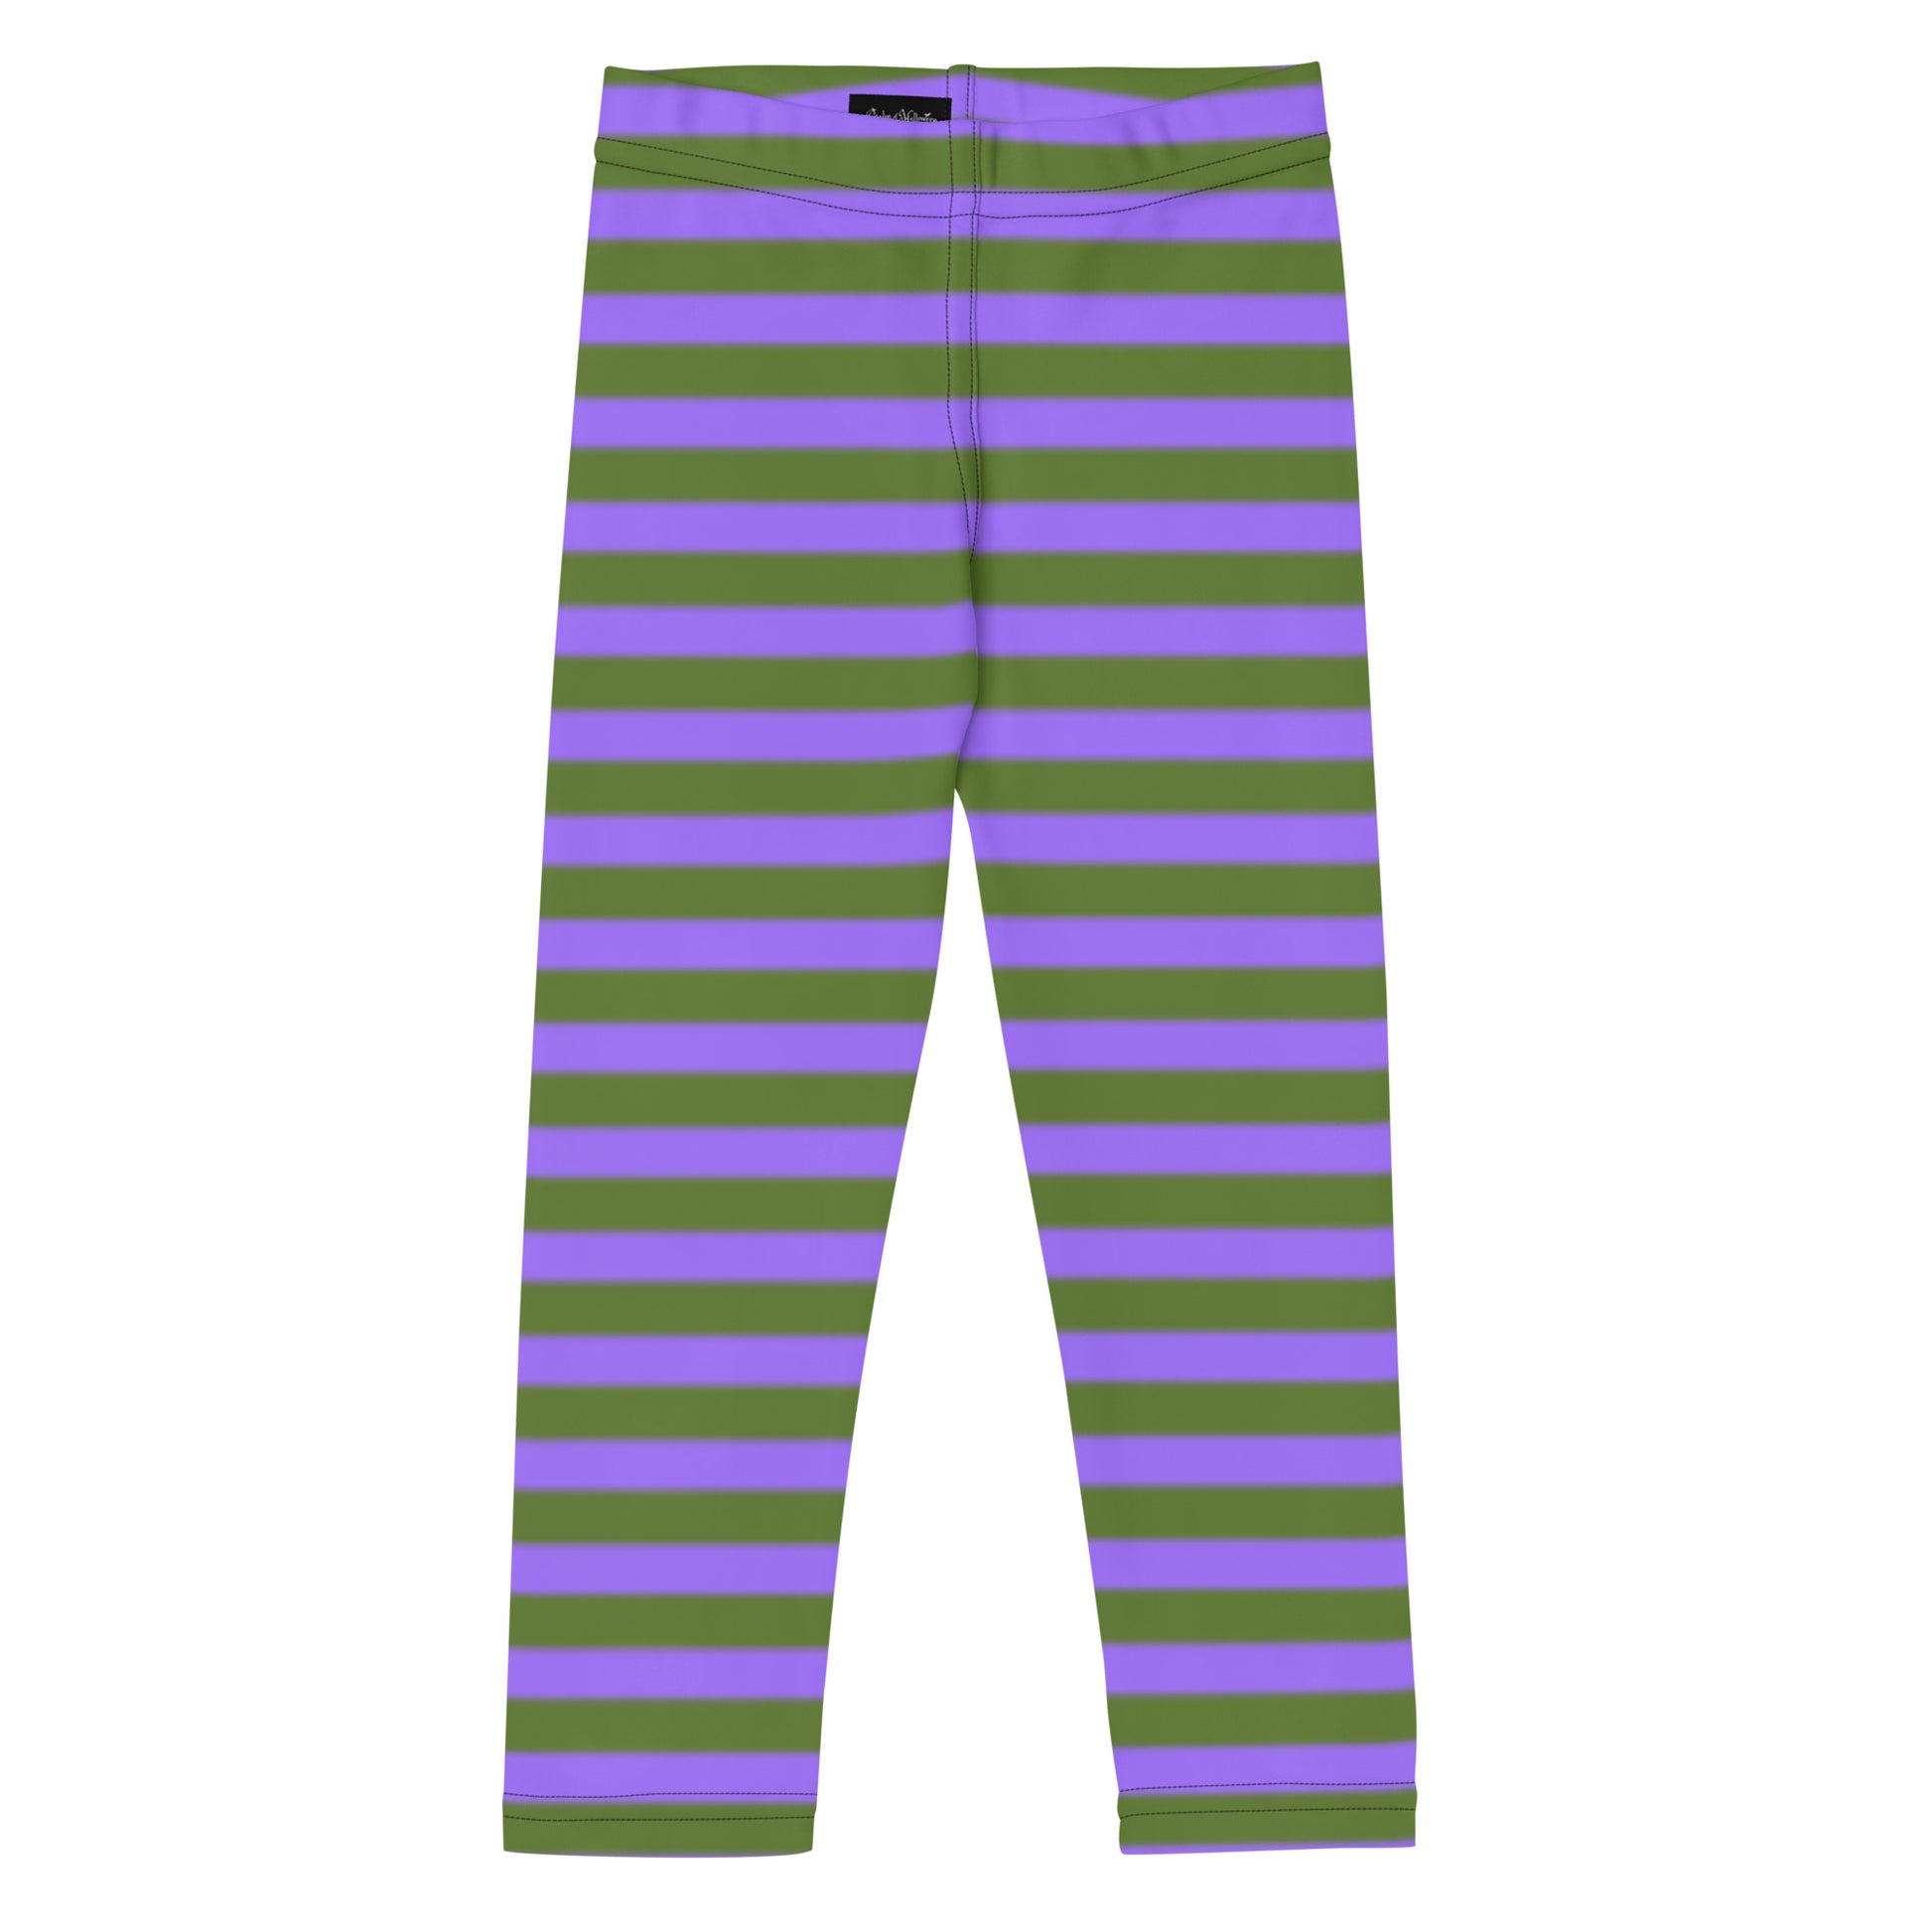 Purple and Green Striped Children’s Leggings, from the You are the Light  Collection